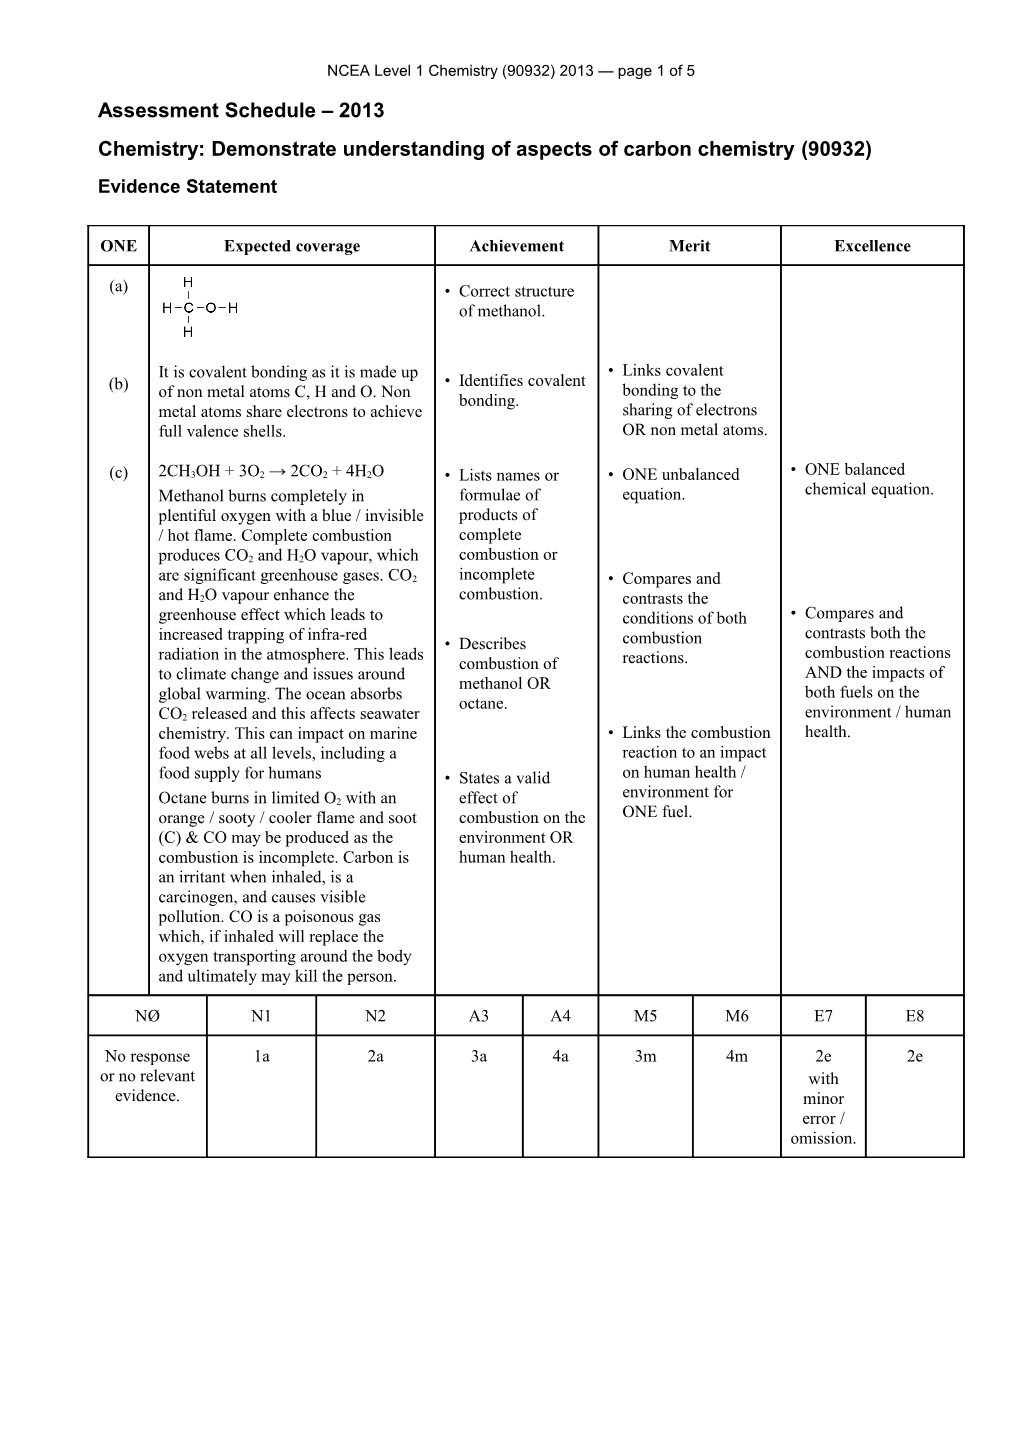 NCEA Level 1 Chemistry (90932) 2013 Assessment Schedule